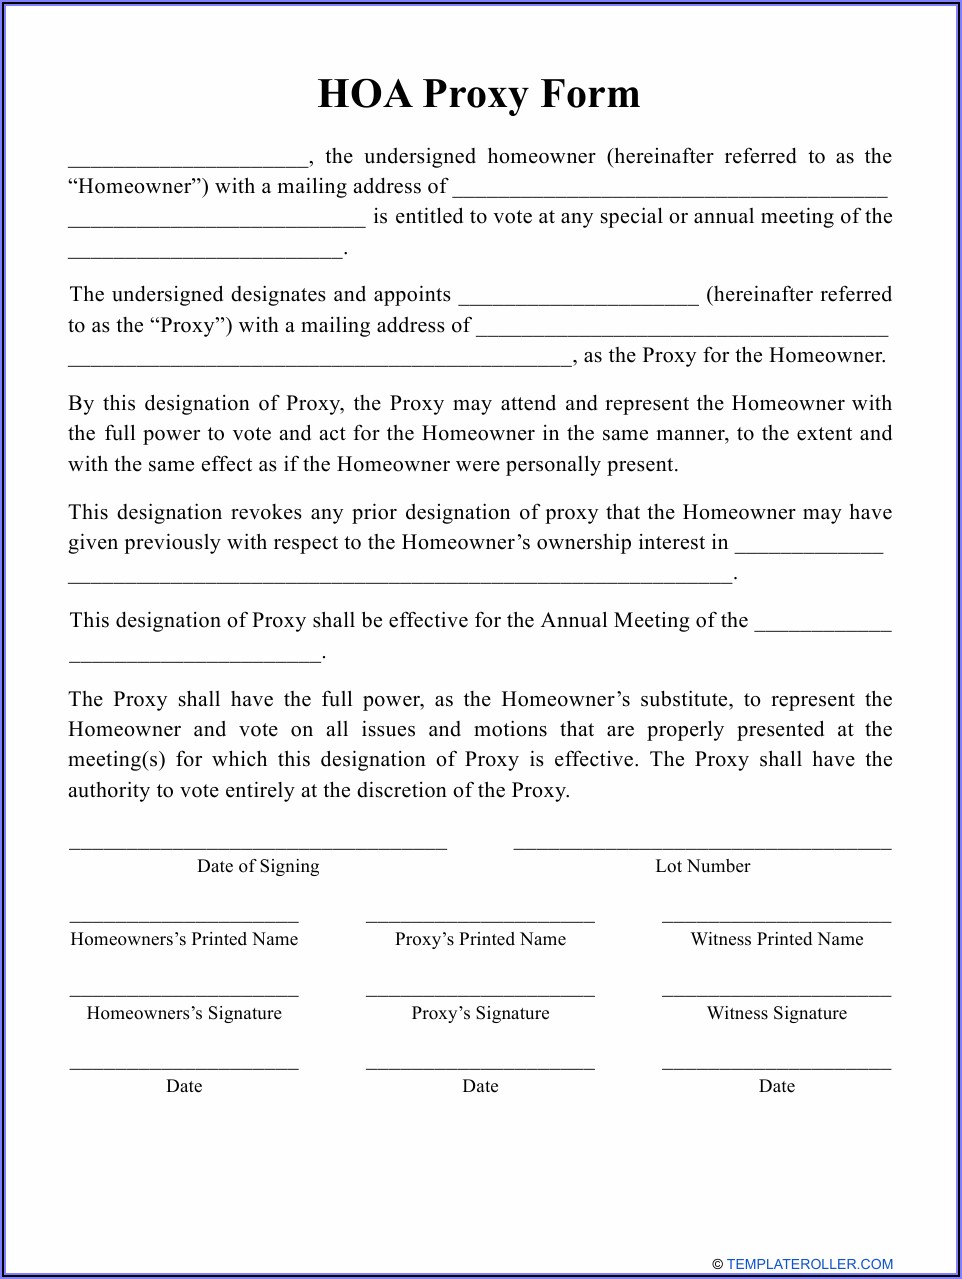 Proxy Voting Form Template Free Download